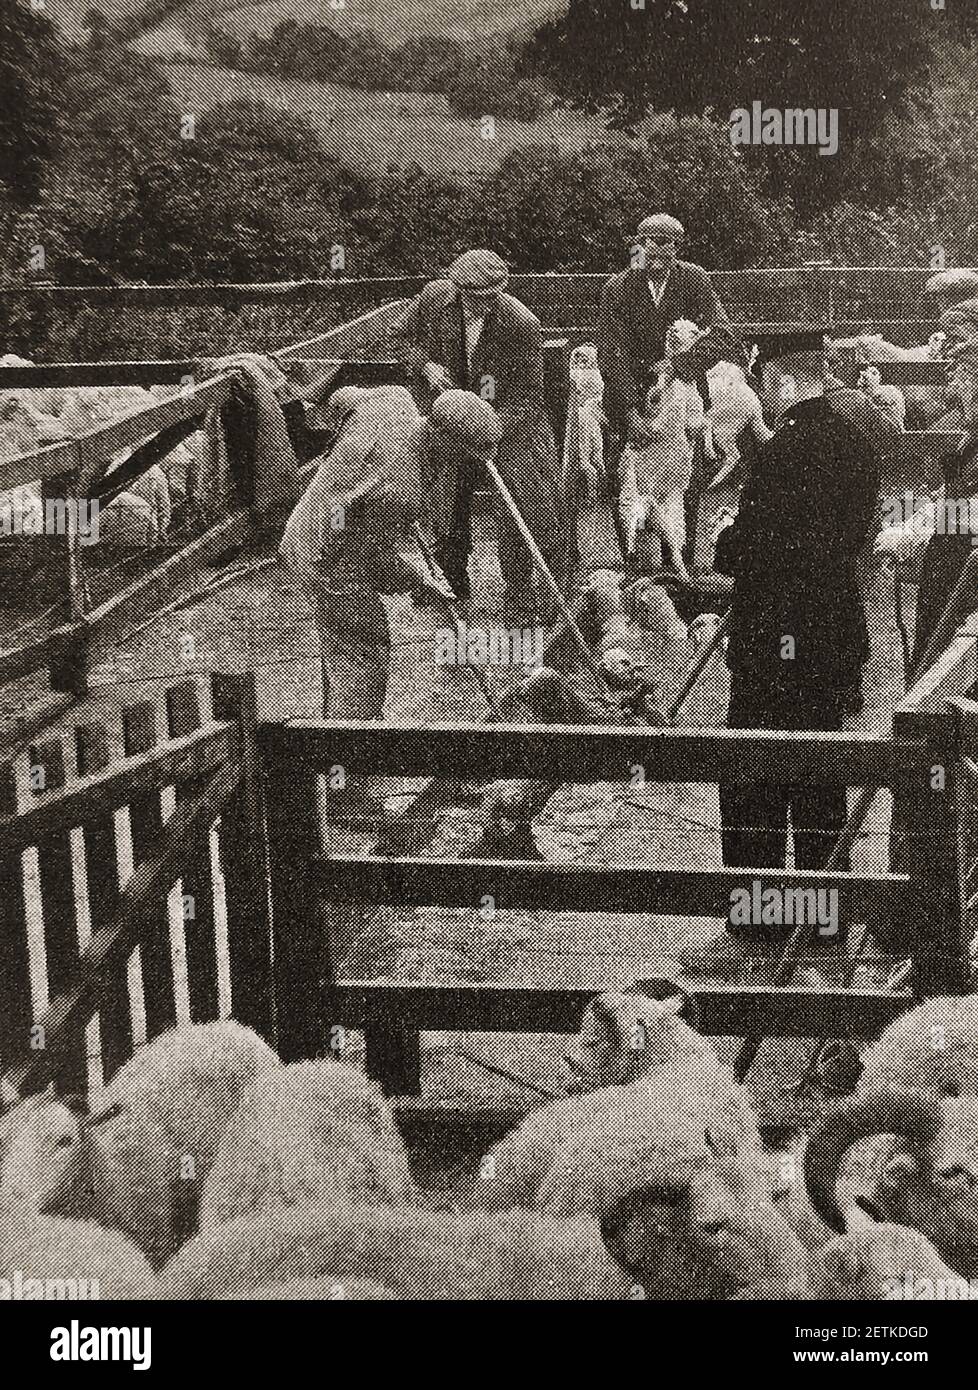 An old press photo showing sheep dipping in Wales during a foot & mouth outbreak, being supervised by a policeman. Stock Photo